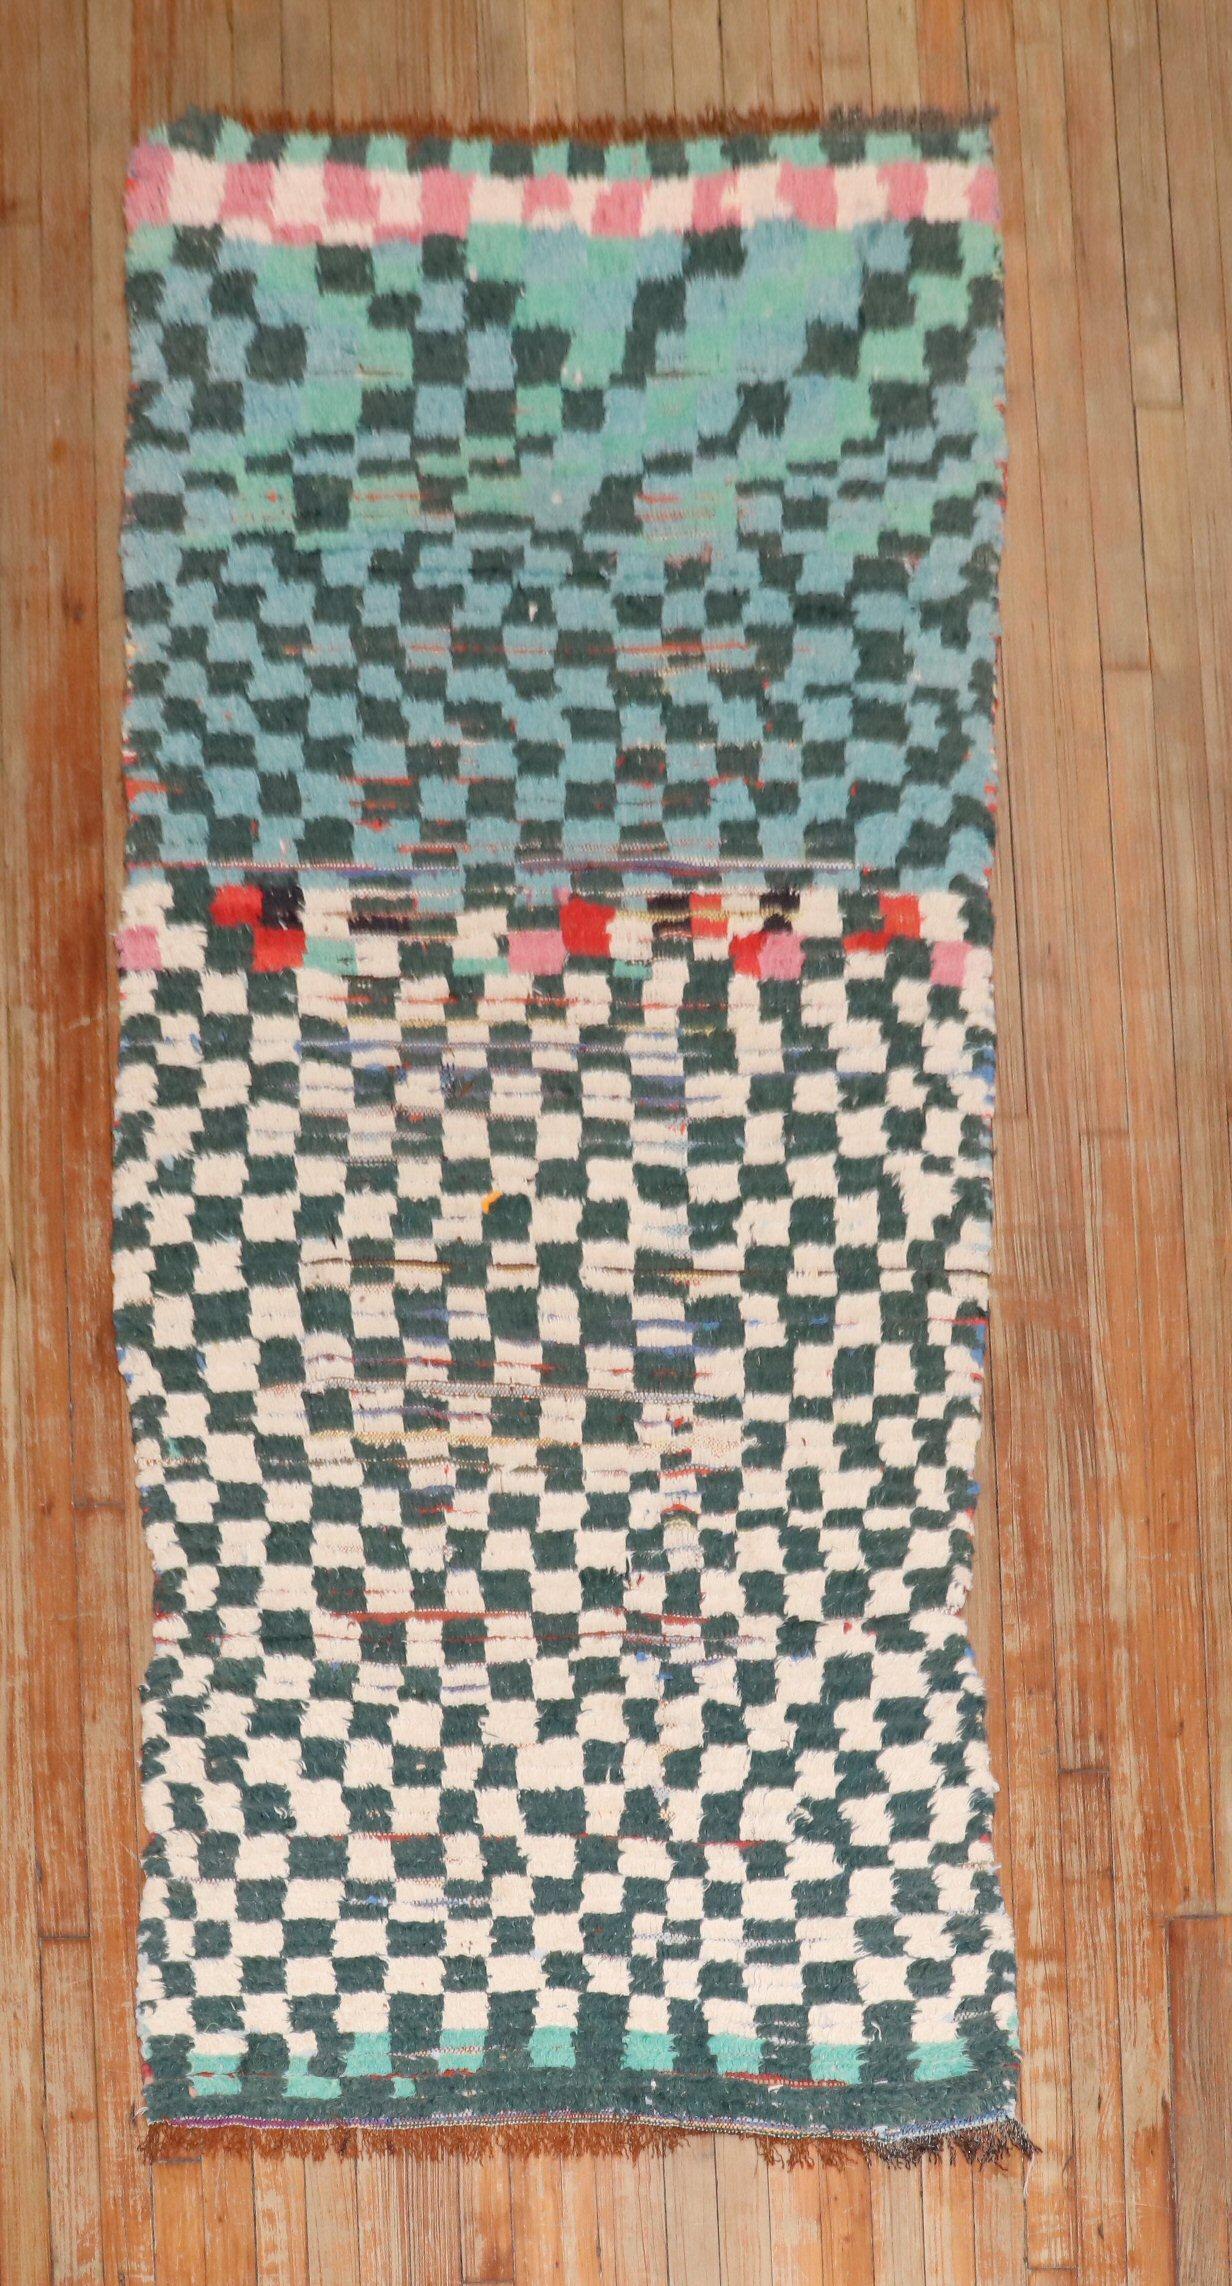 Mid 20th century moroccan small runner with the ever recurring archetypical checkerboard design made in this case from industrial yarns. The traces of wear create a kind of double layer between the cool blue / green / petrol shades of the pile + the